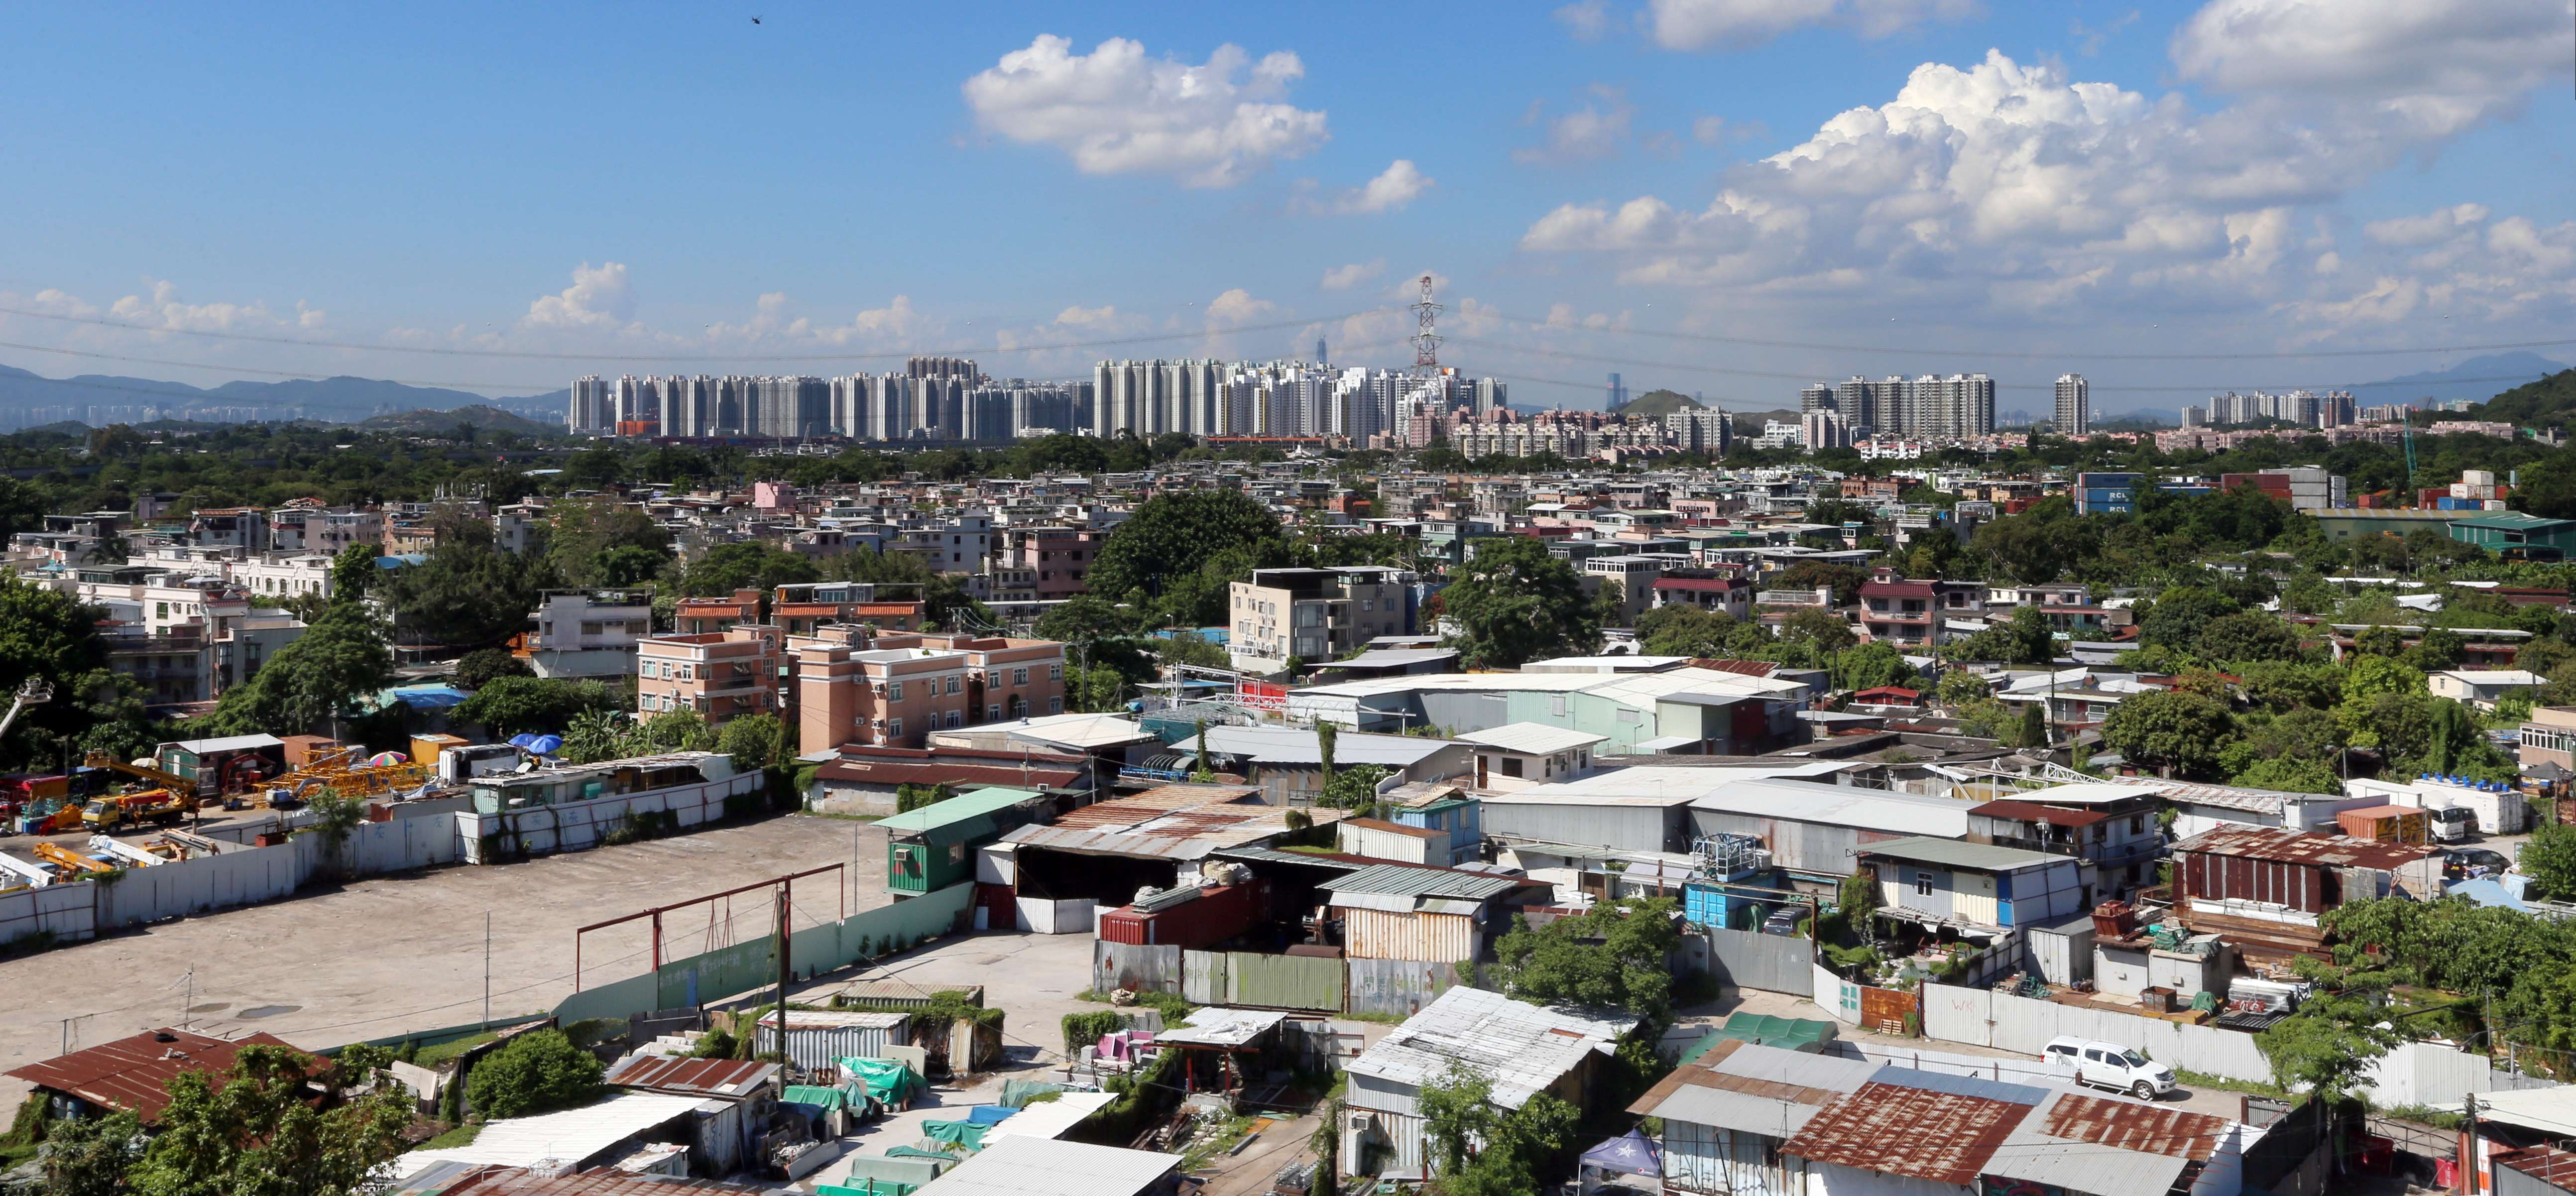 The lack of urban land has pushed many operators of garages, car parks and container storage facilities to use brownfield sites. Photo: David Wong